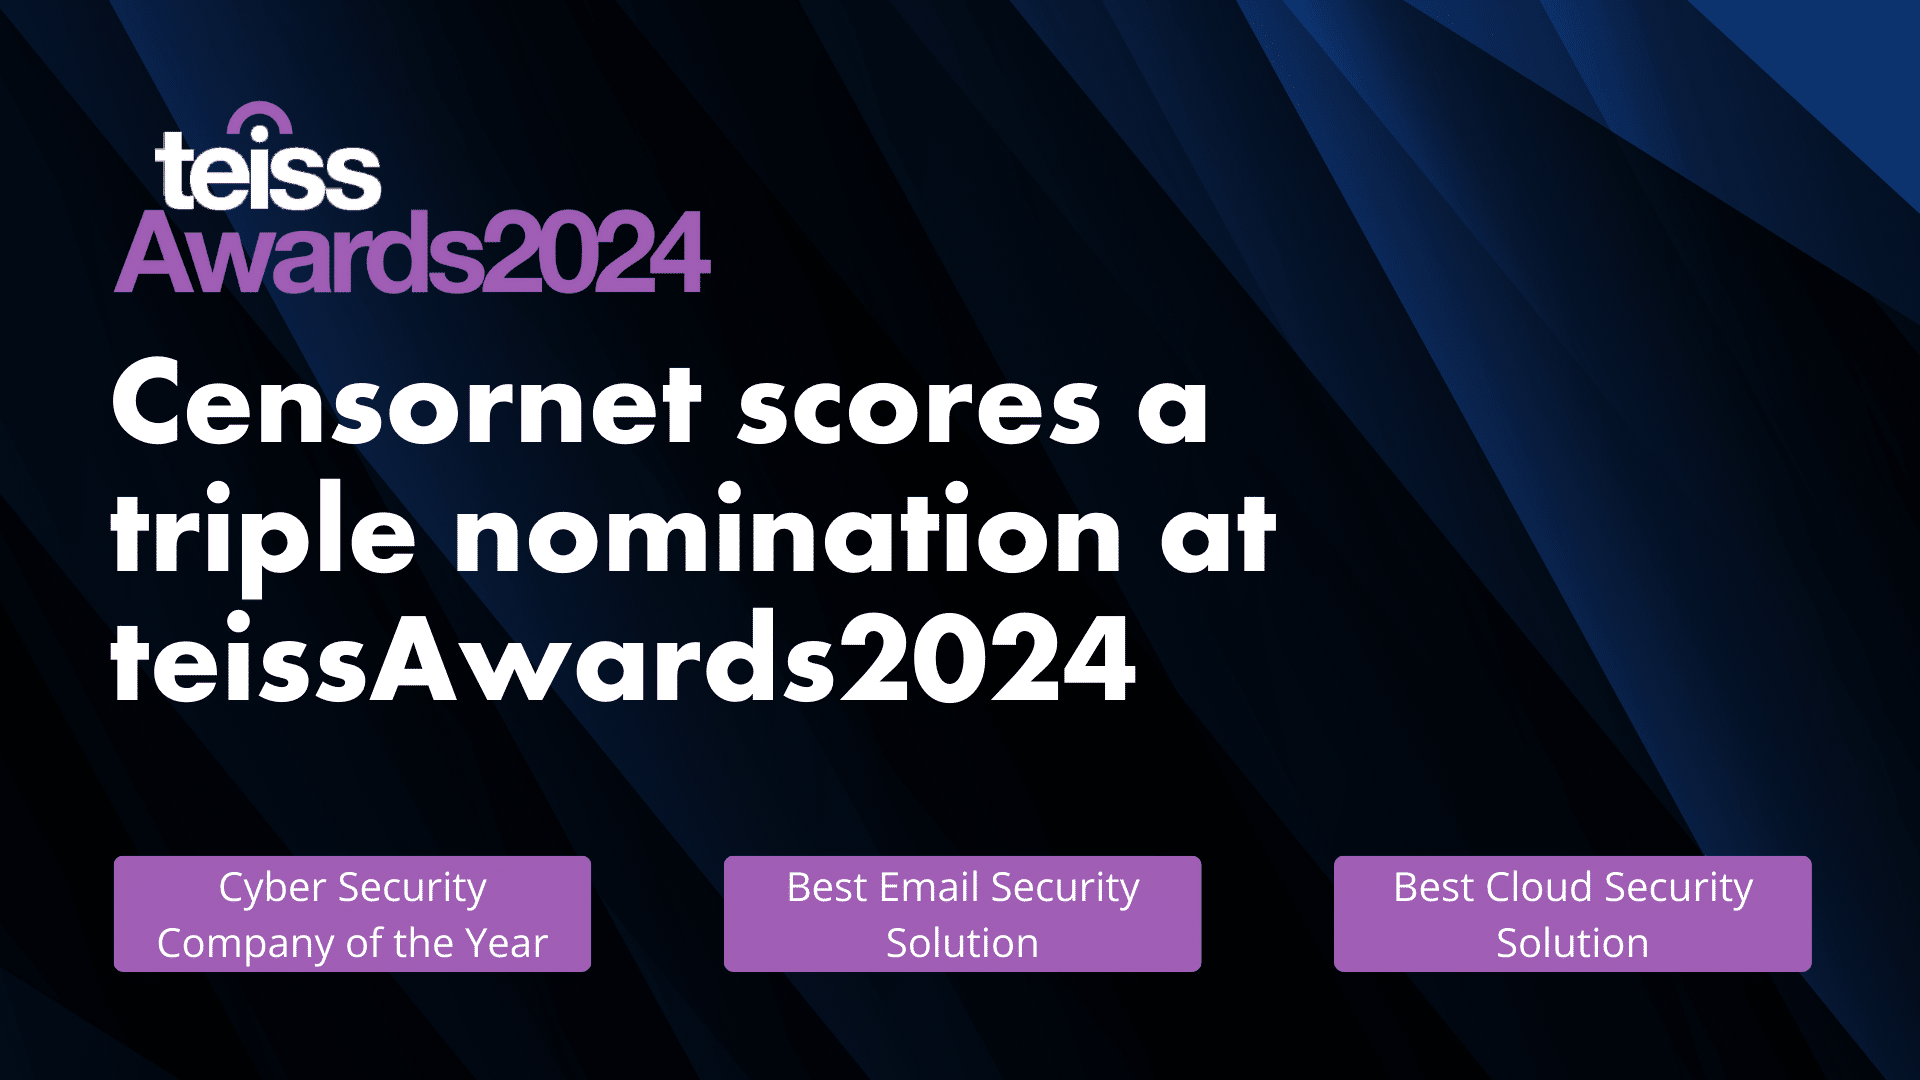 Censornet shortlisted for three awards at teissAwards2024